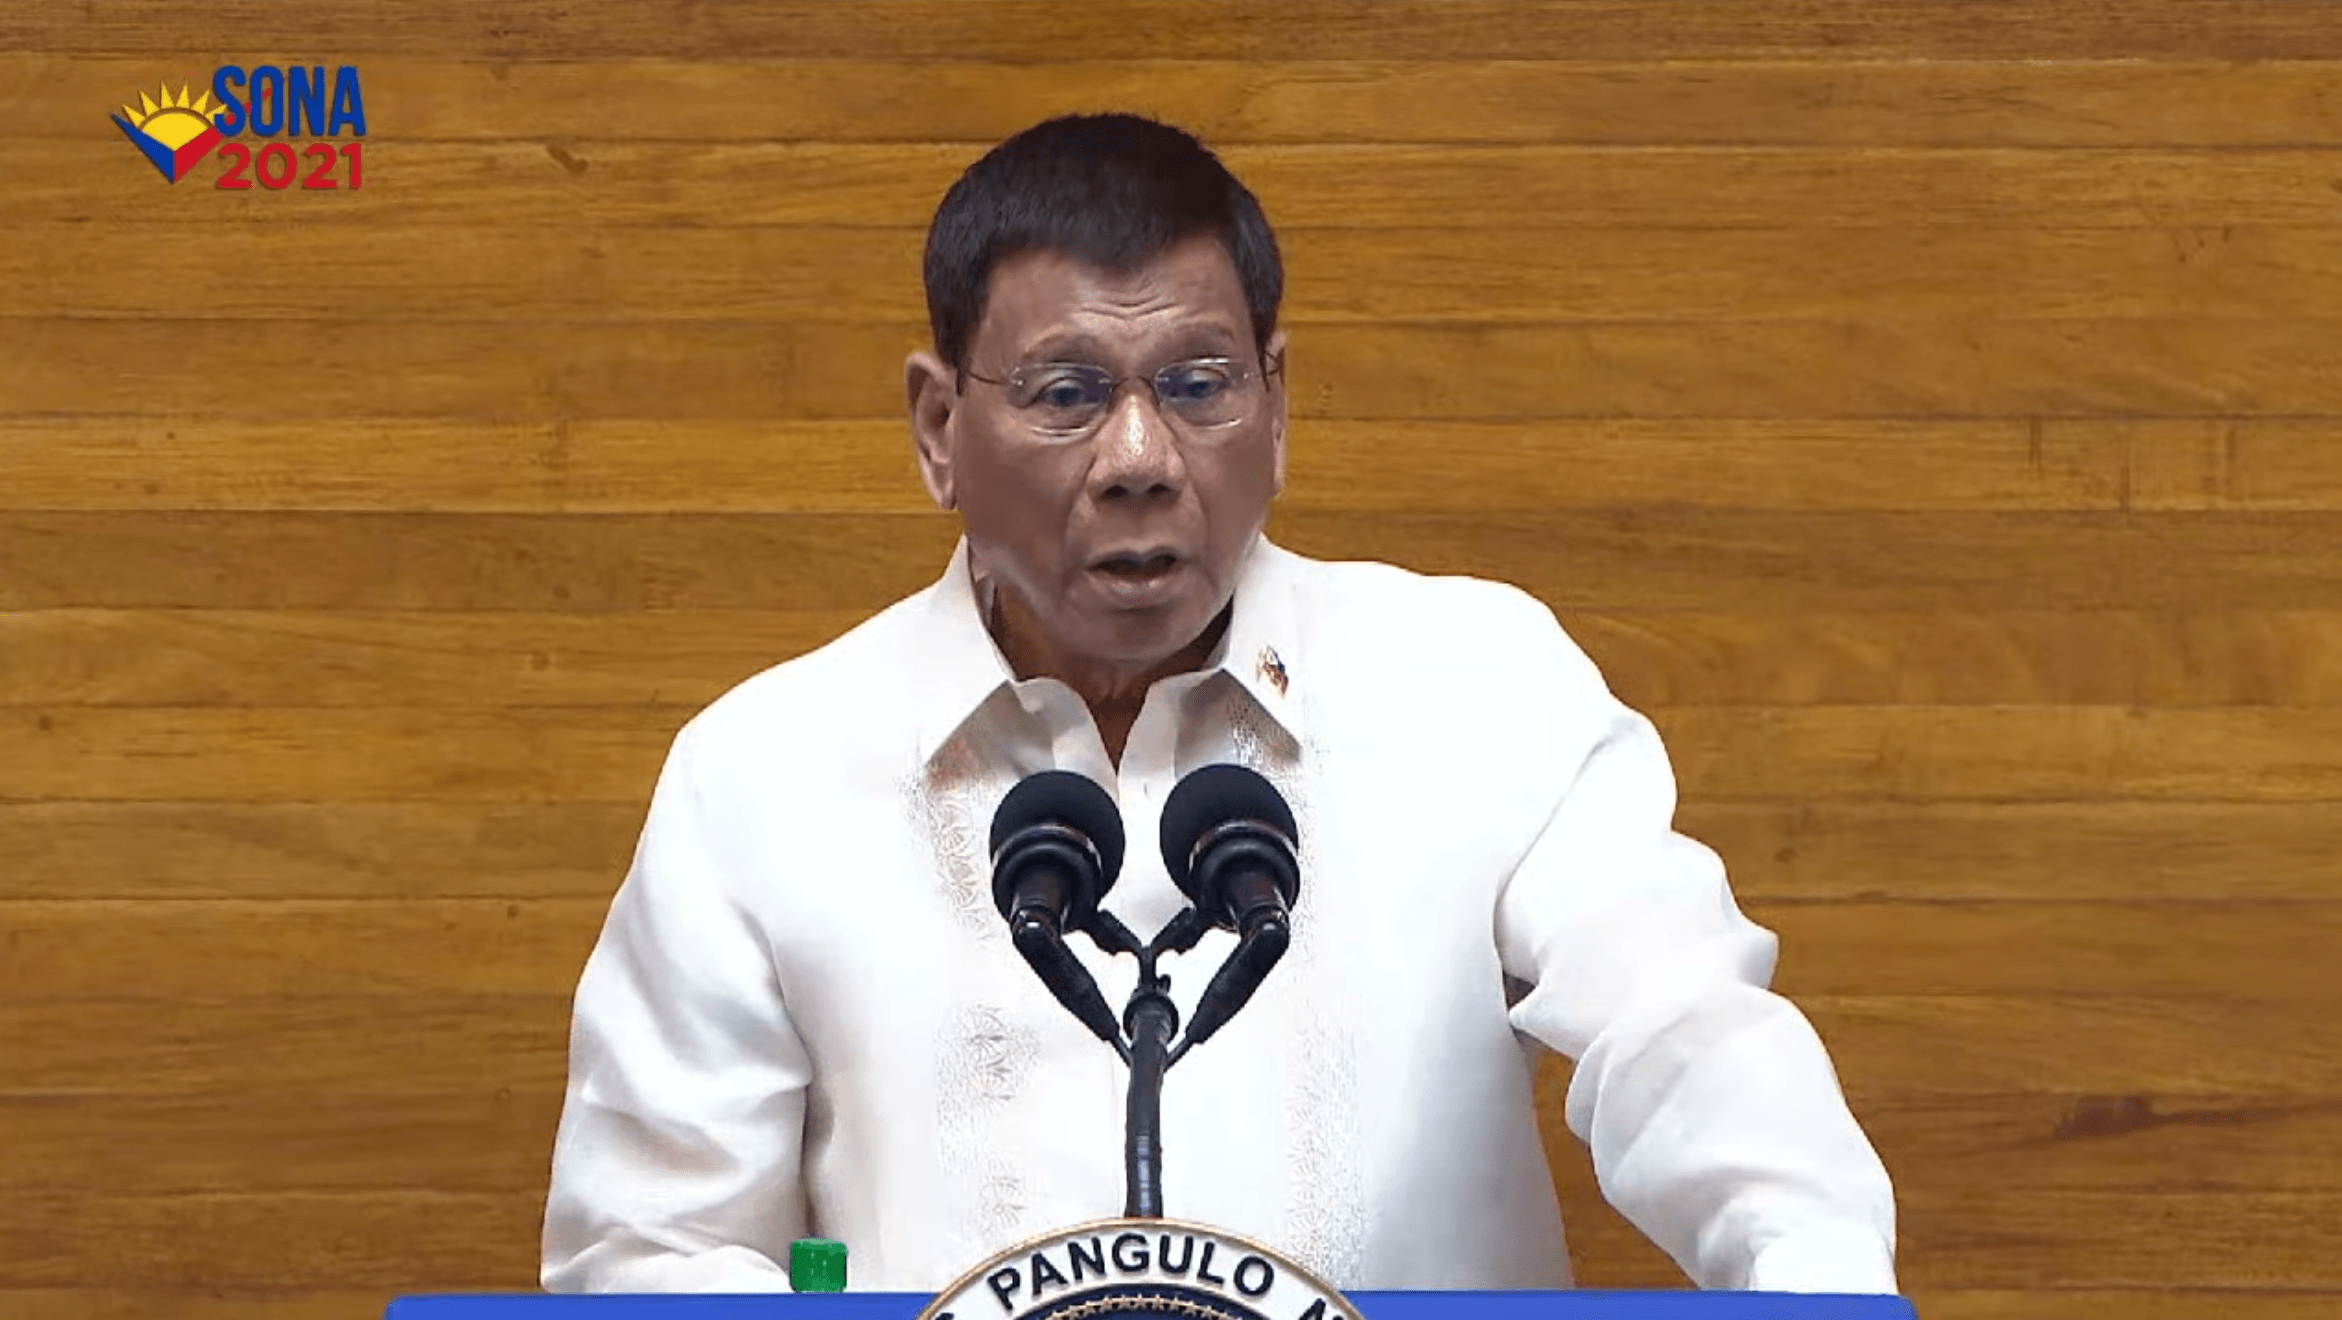 MISSING CONTEXT: Duterte policy to make Davao Region ‘last priority’ for infrastructure